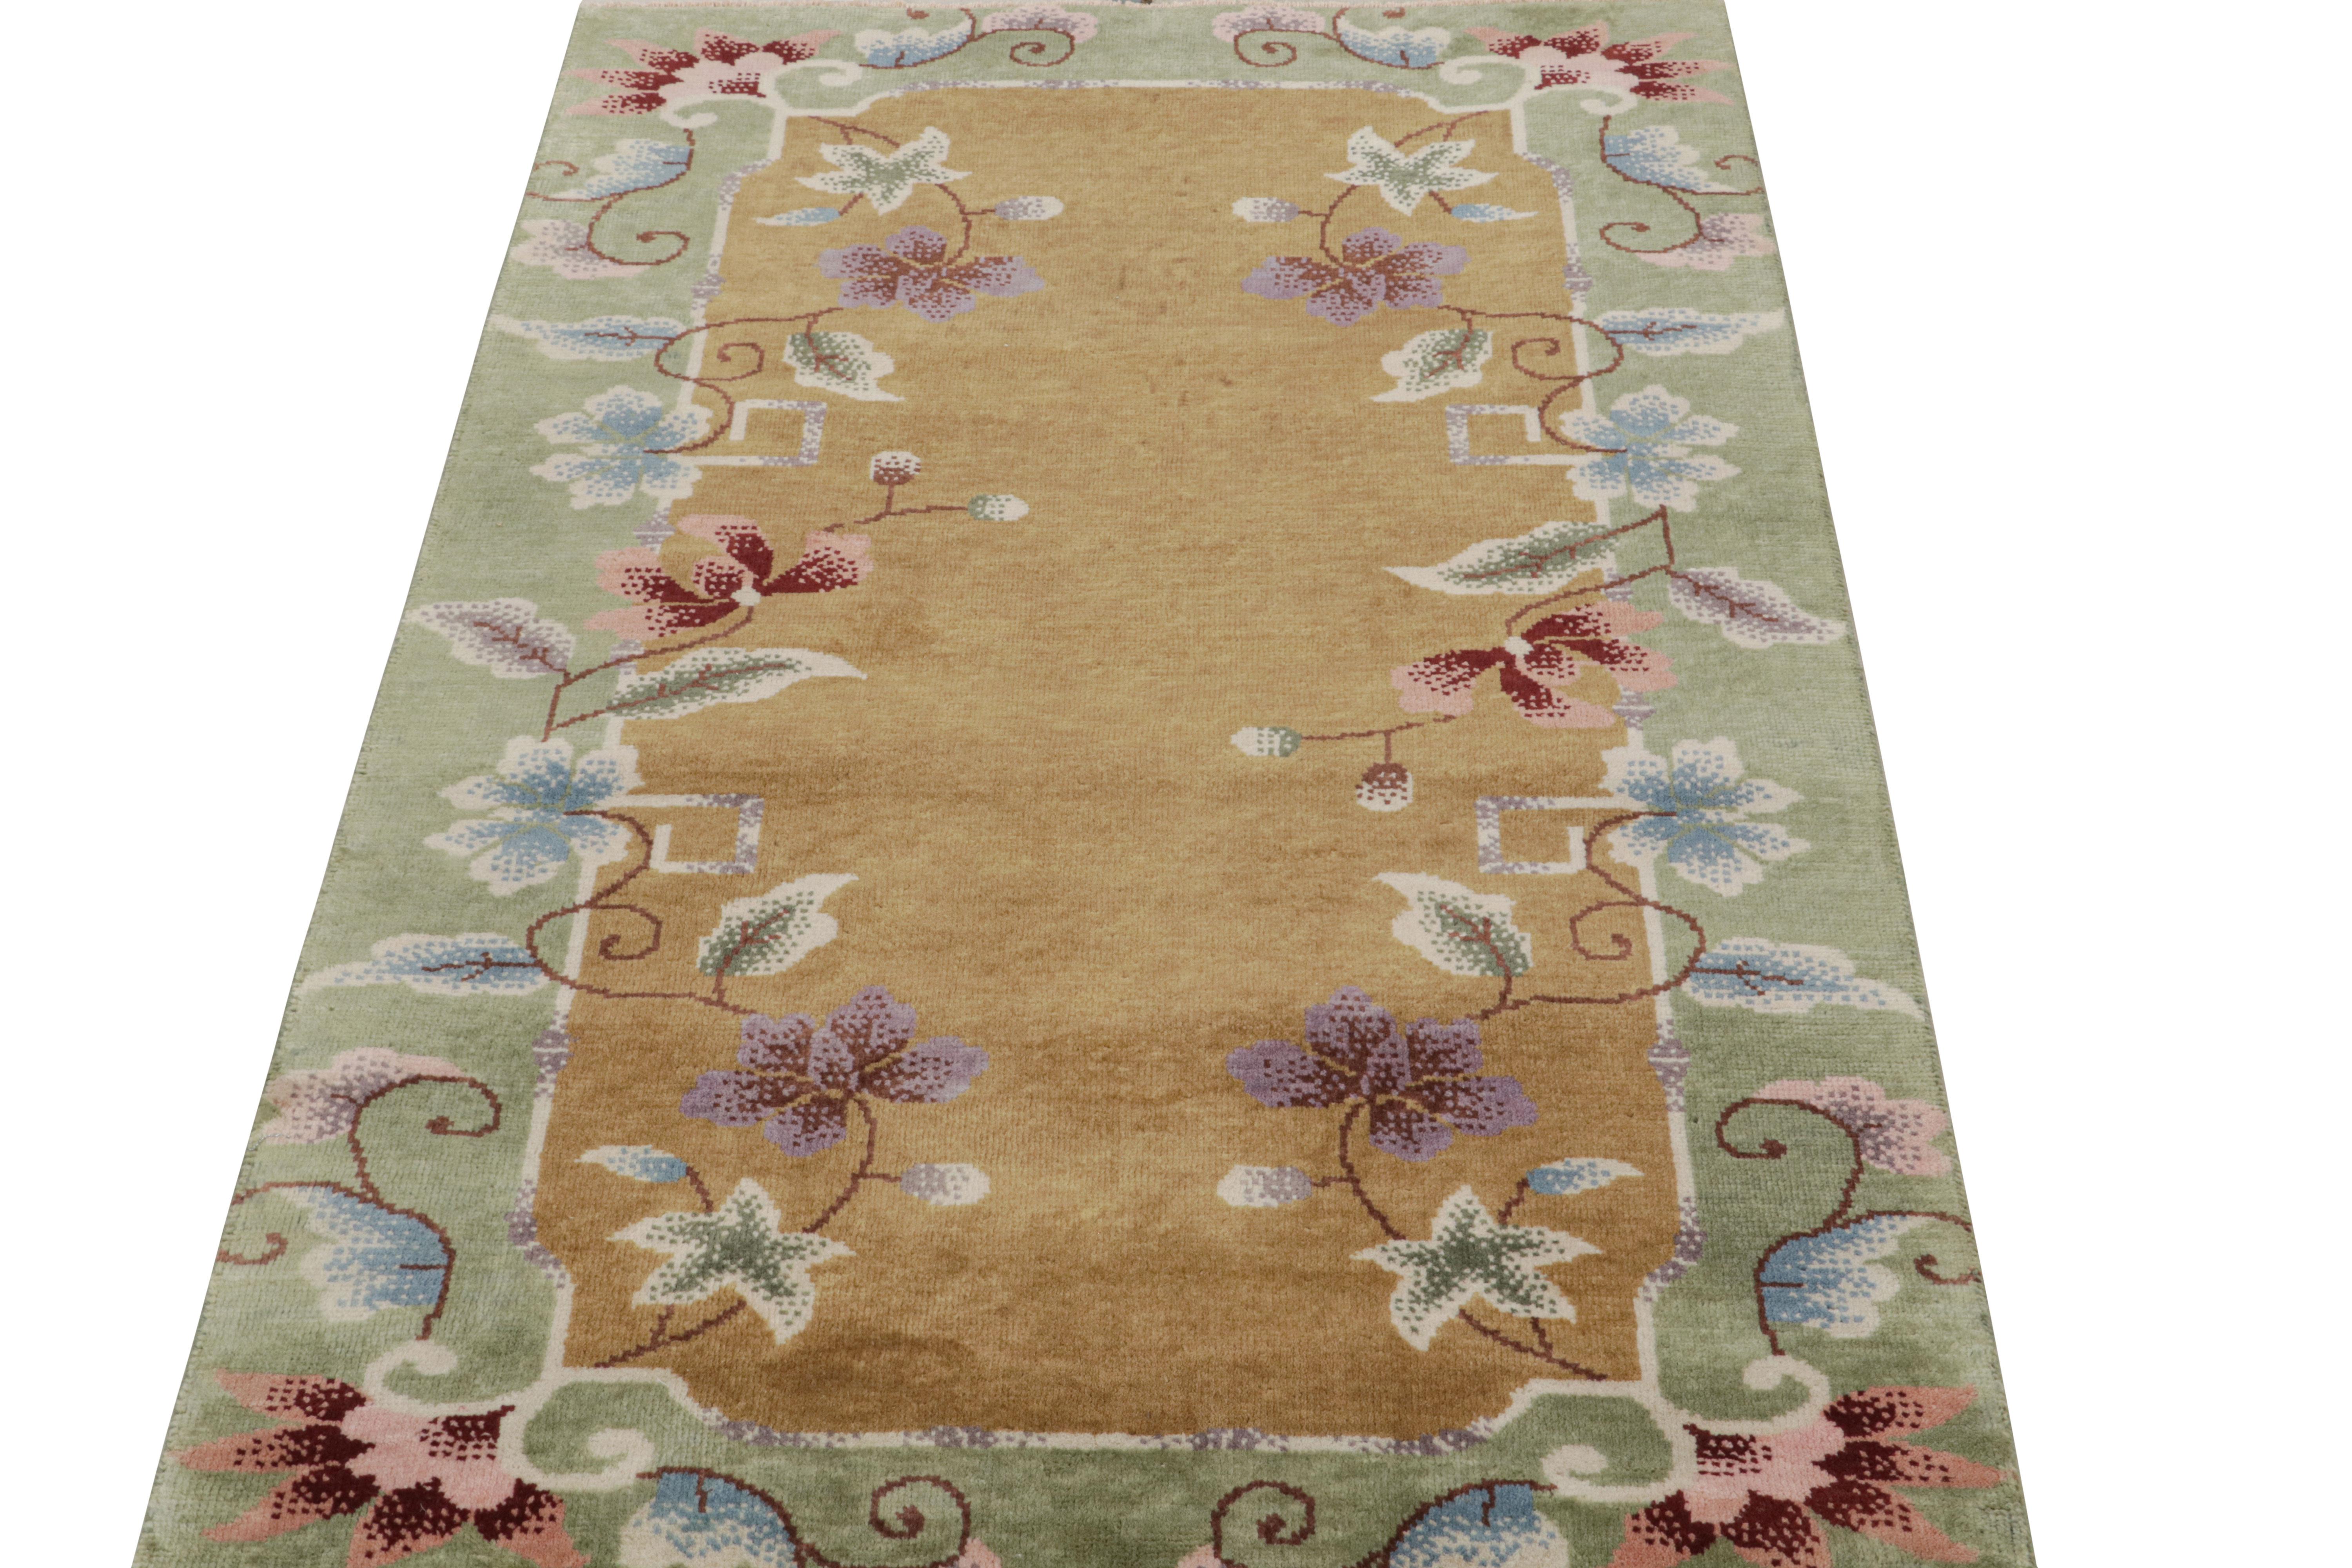 Hand-knotted in wool, this 3×5 rug by Rug & Kilim is a new addition to their Chinese Art Deco rug line. 

On the Design: 

The rug enjoys a golden-brown open field with green borders marrying floral patterns in light blue and pink tones. Admirers of